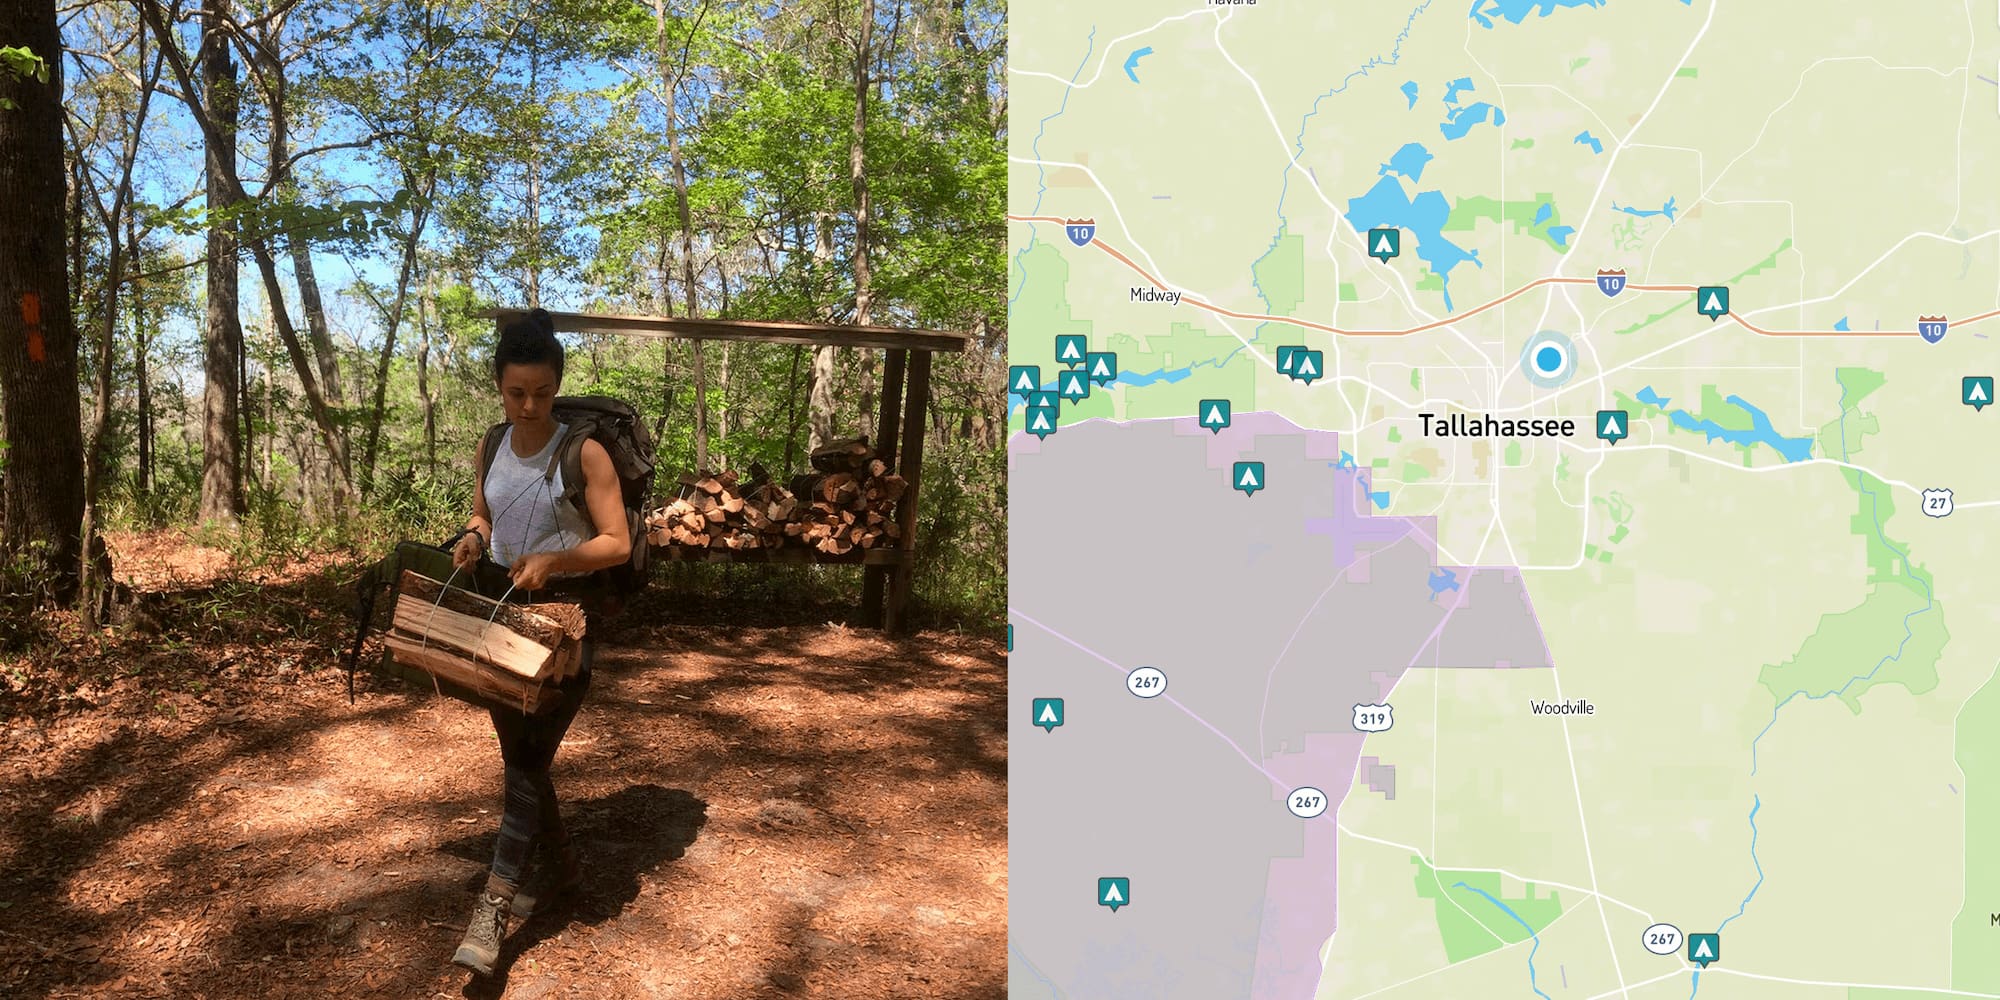 Woman carrying firewood to a campground in Tallahassee beside a map of campgrounds around Tallahassee, Florida.